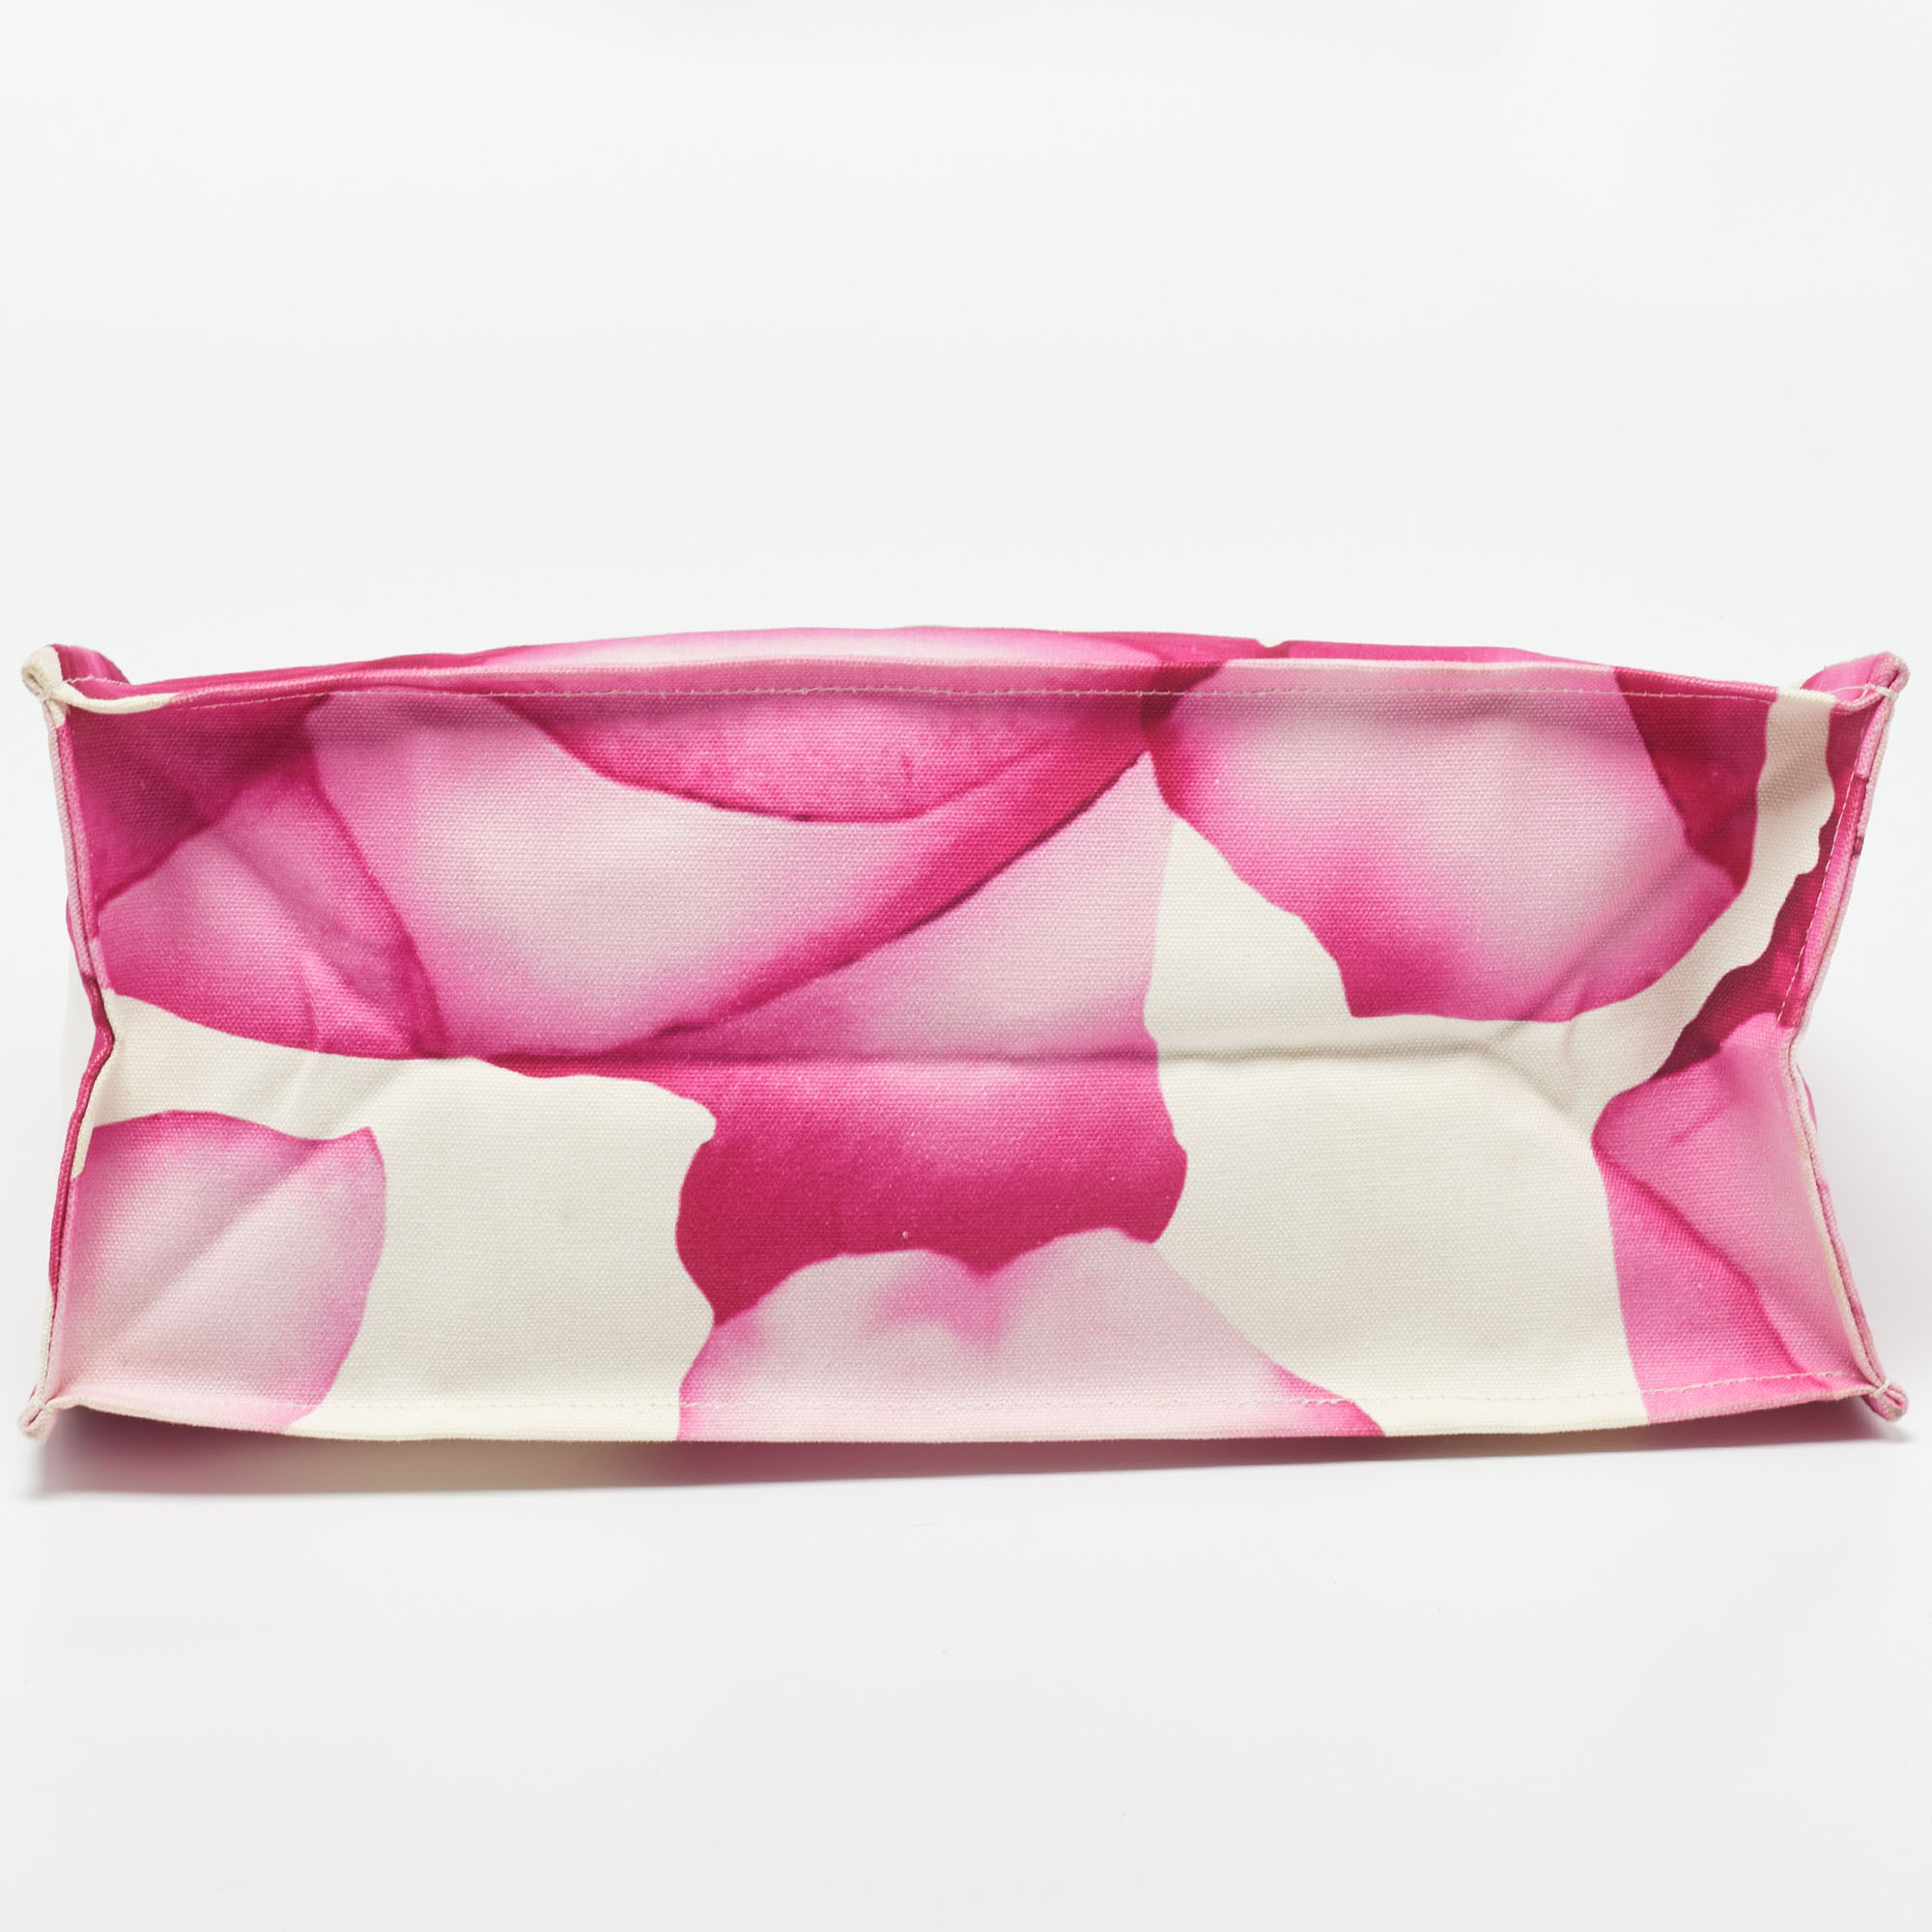 Longchamp Pink/White Floral Print Canvas And Leather Shopper Tote